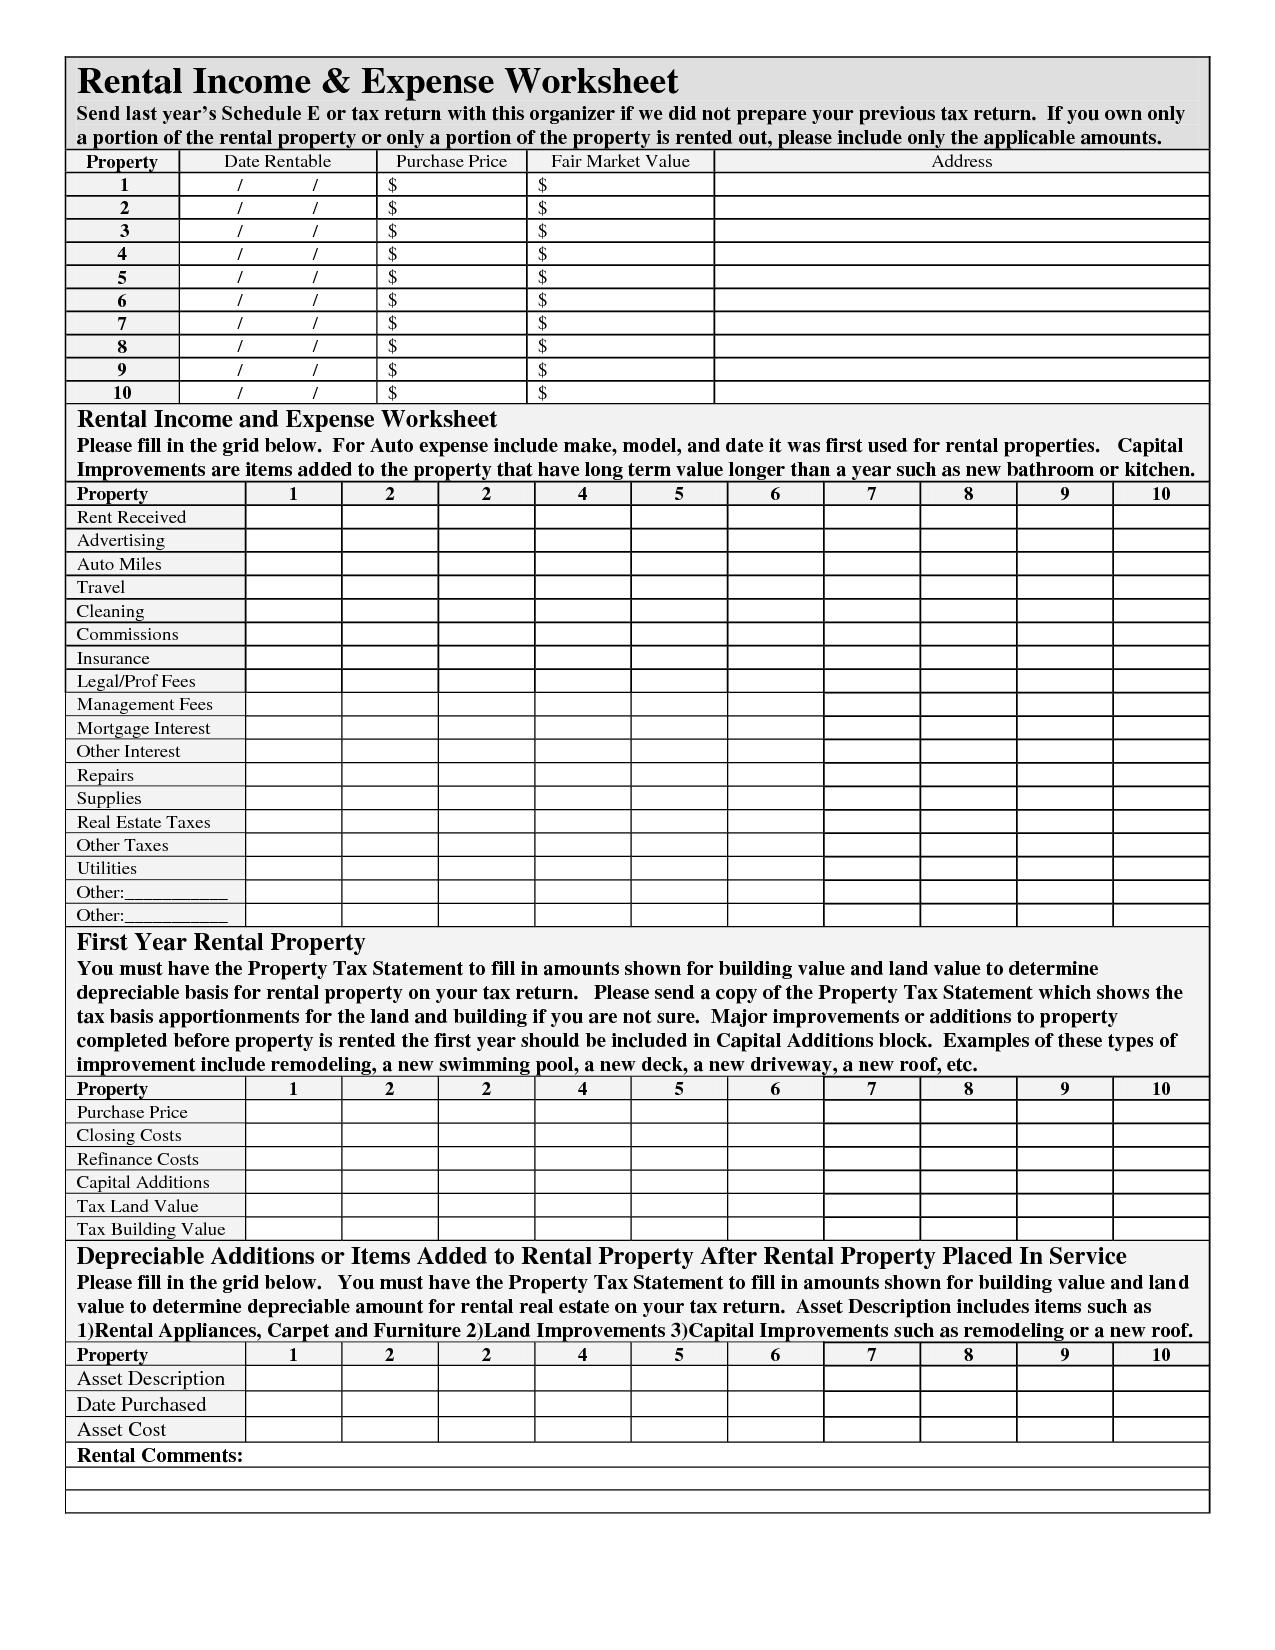 18 Best Images of Farm Expense Worksheet - 2012 IRS Tax Form 1040